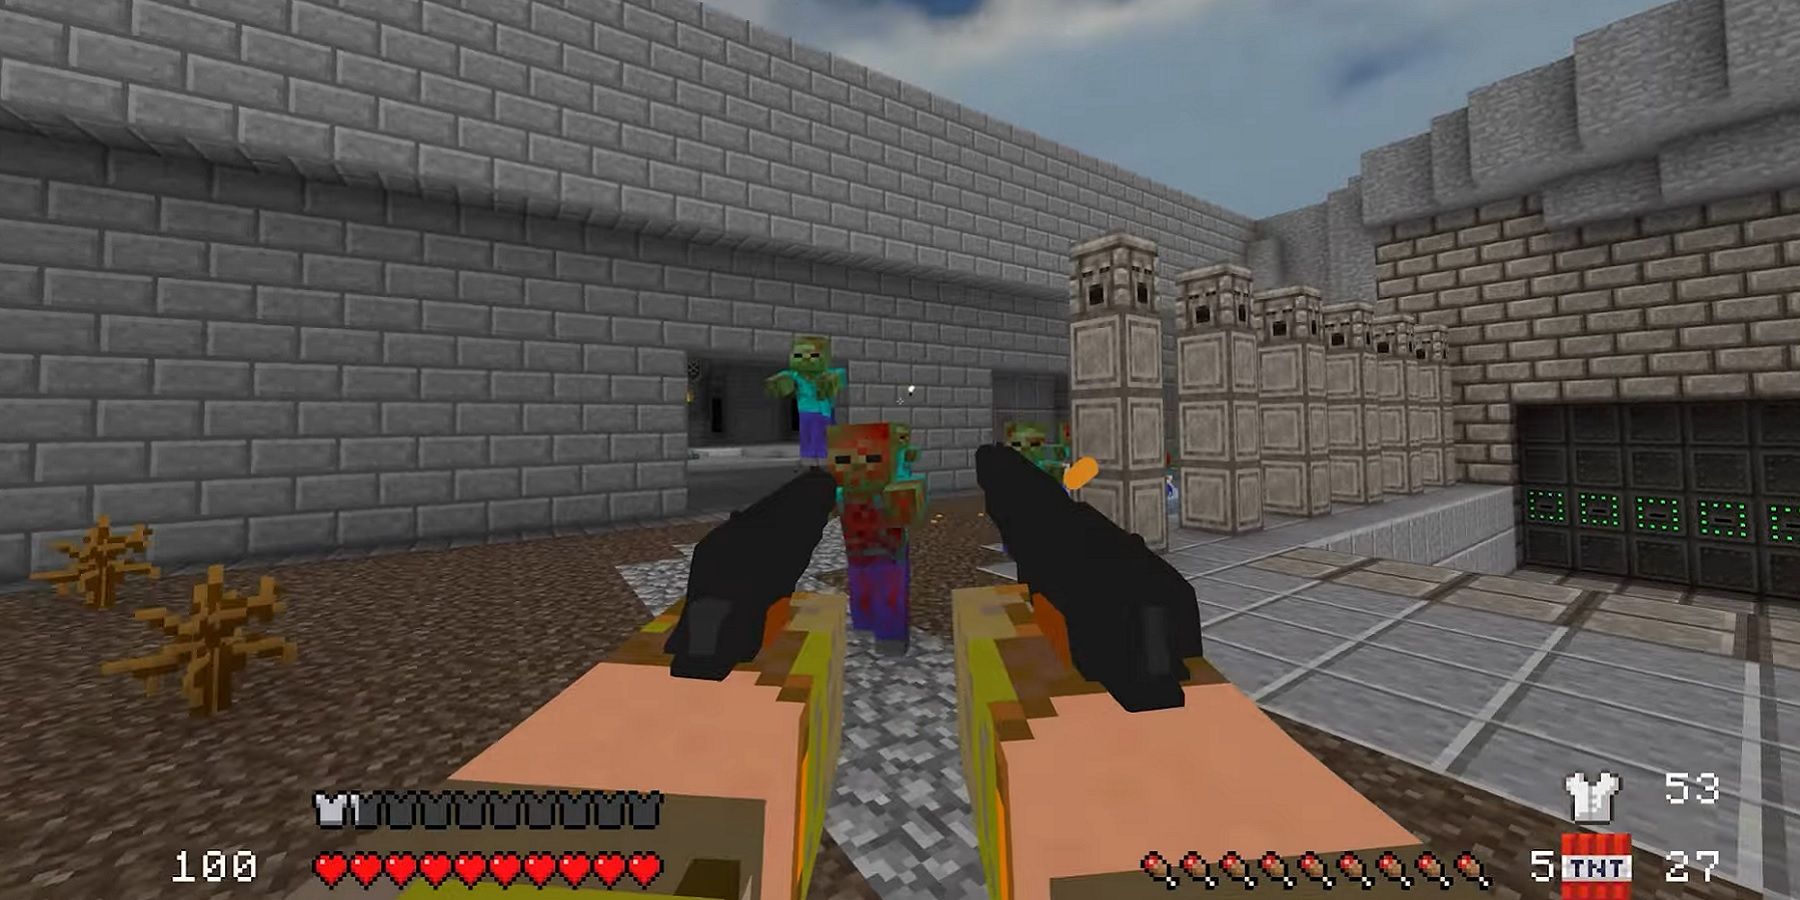 Screenshot from a Doom 2 mod showing the player shooting zombies in a Minecraft world.